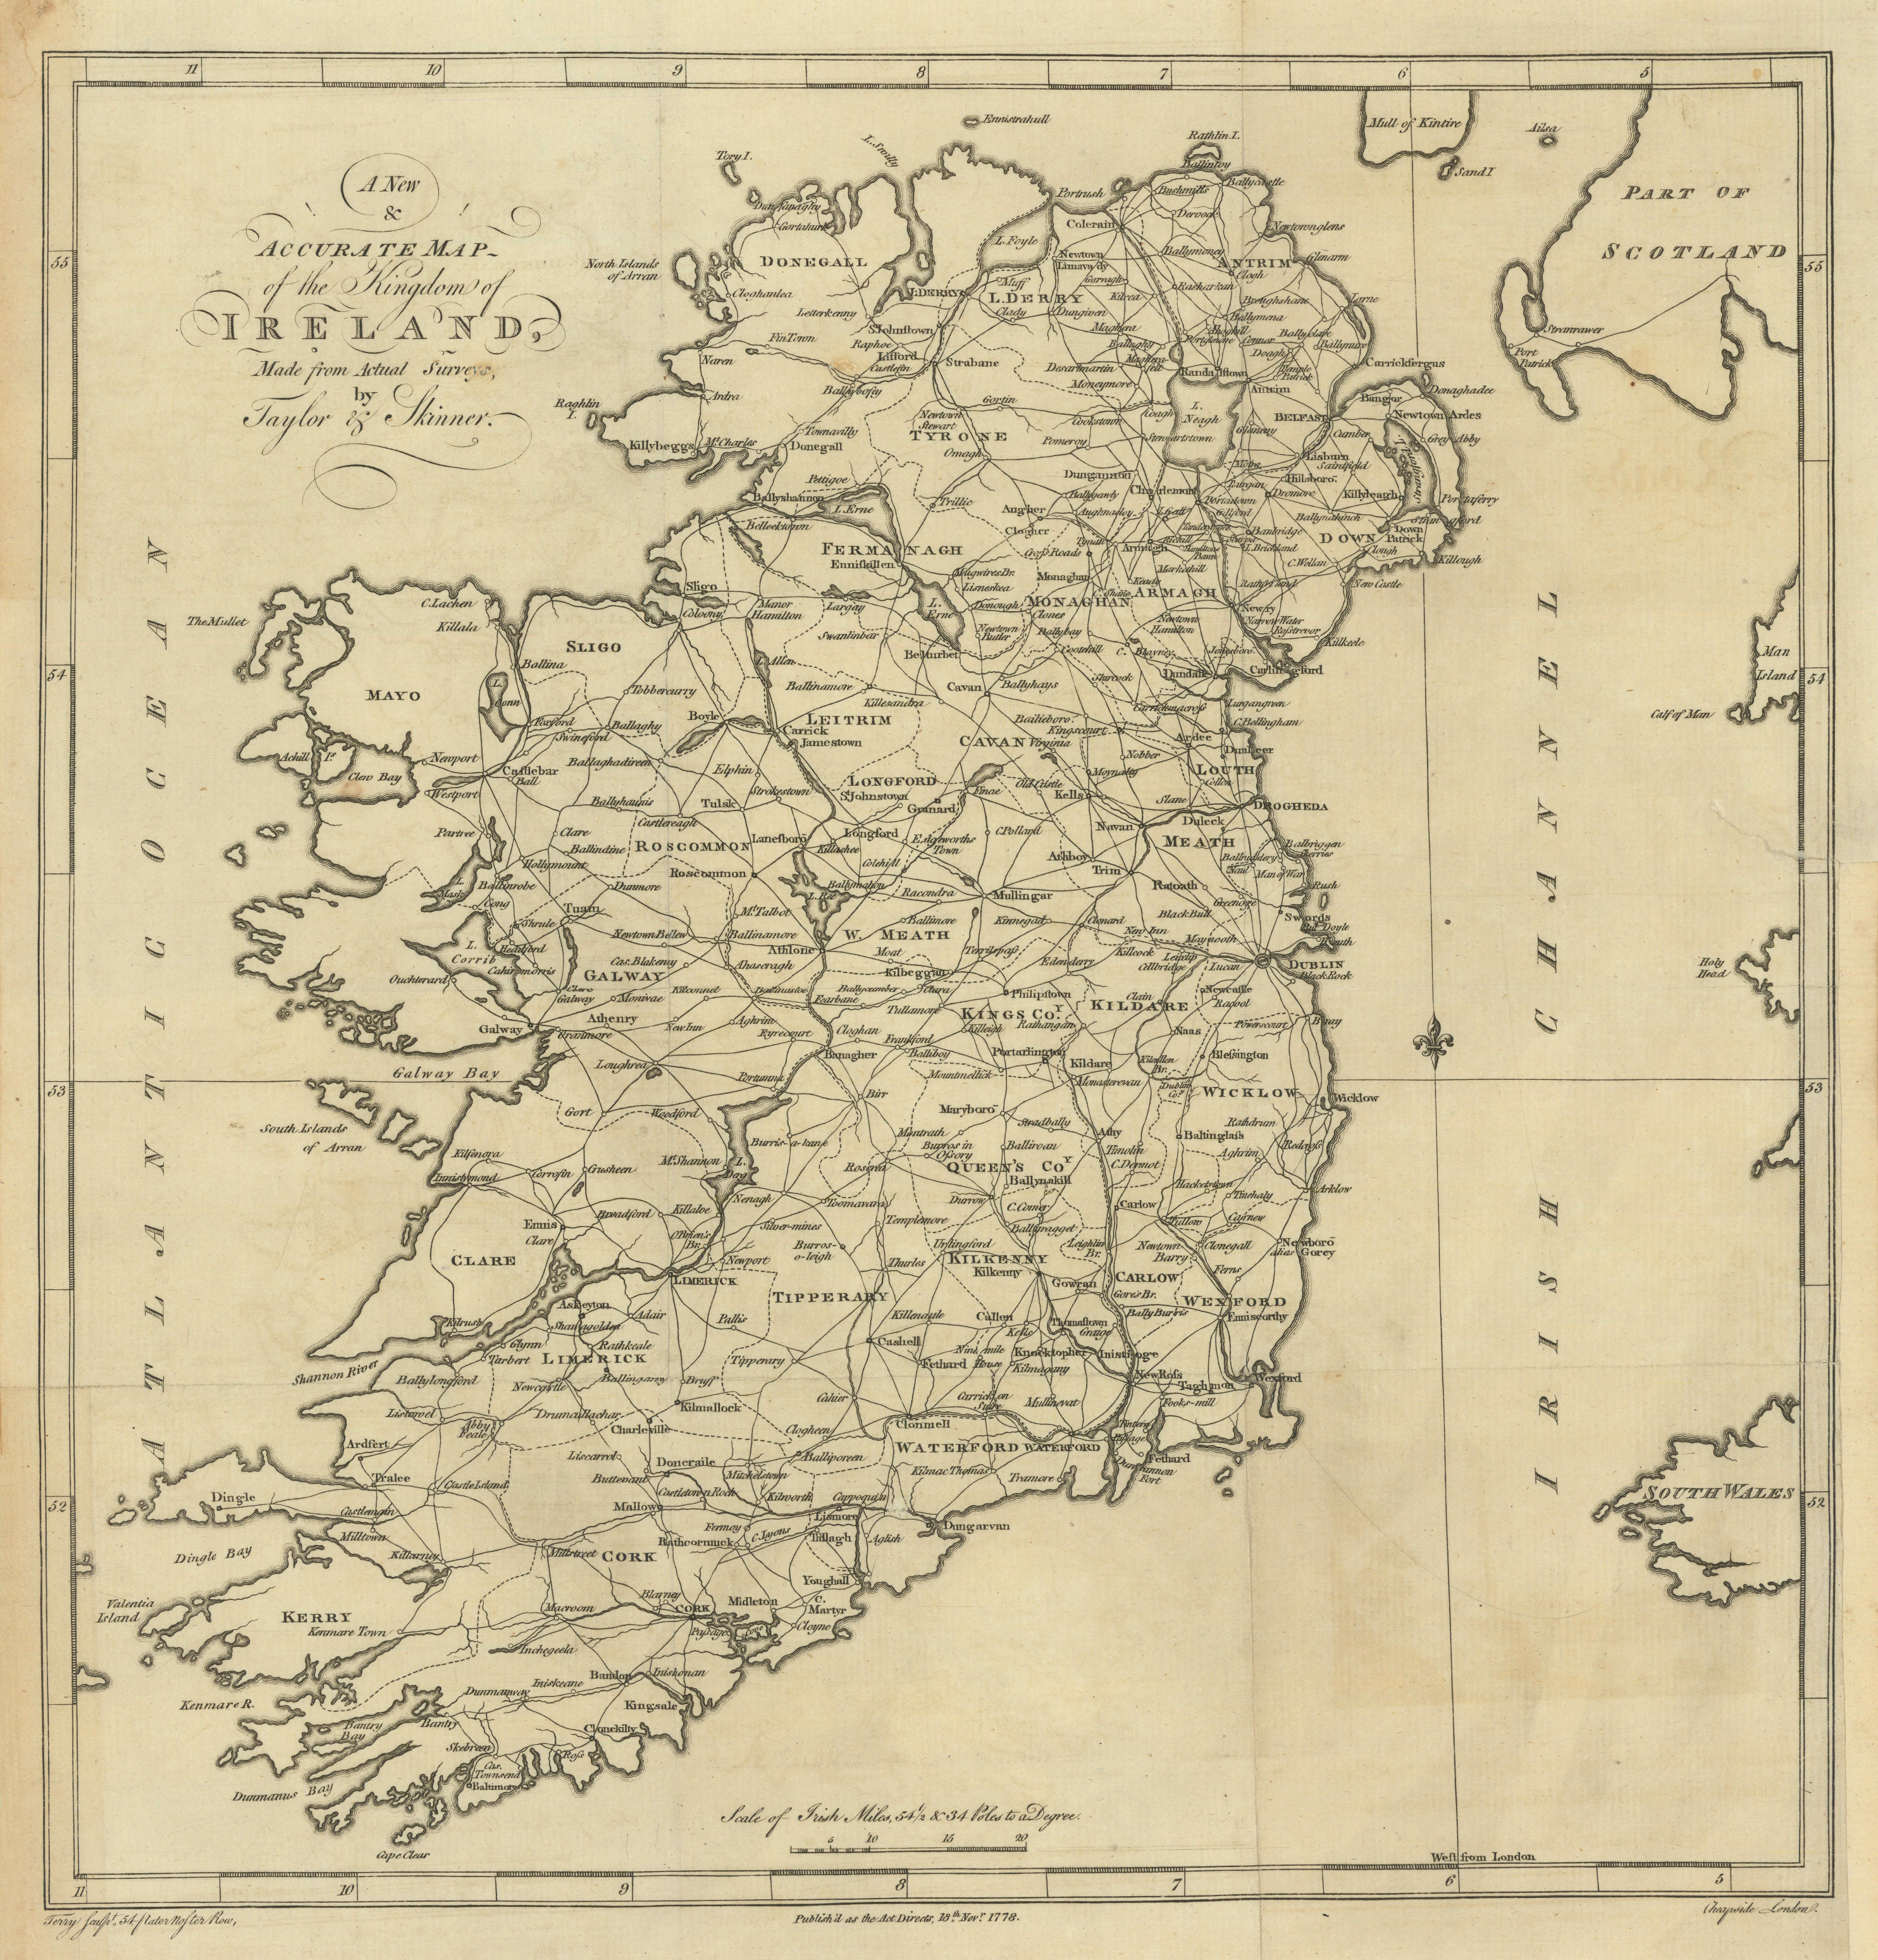 A New & Accurate Map of the Kingdom of Ireland, by Taylor & Skinner 1778